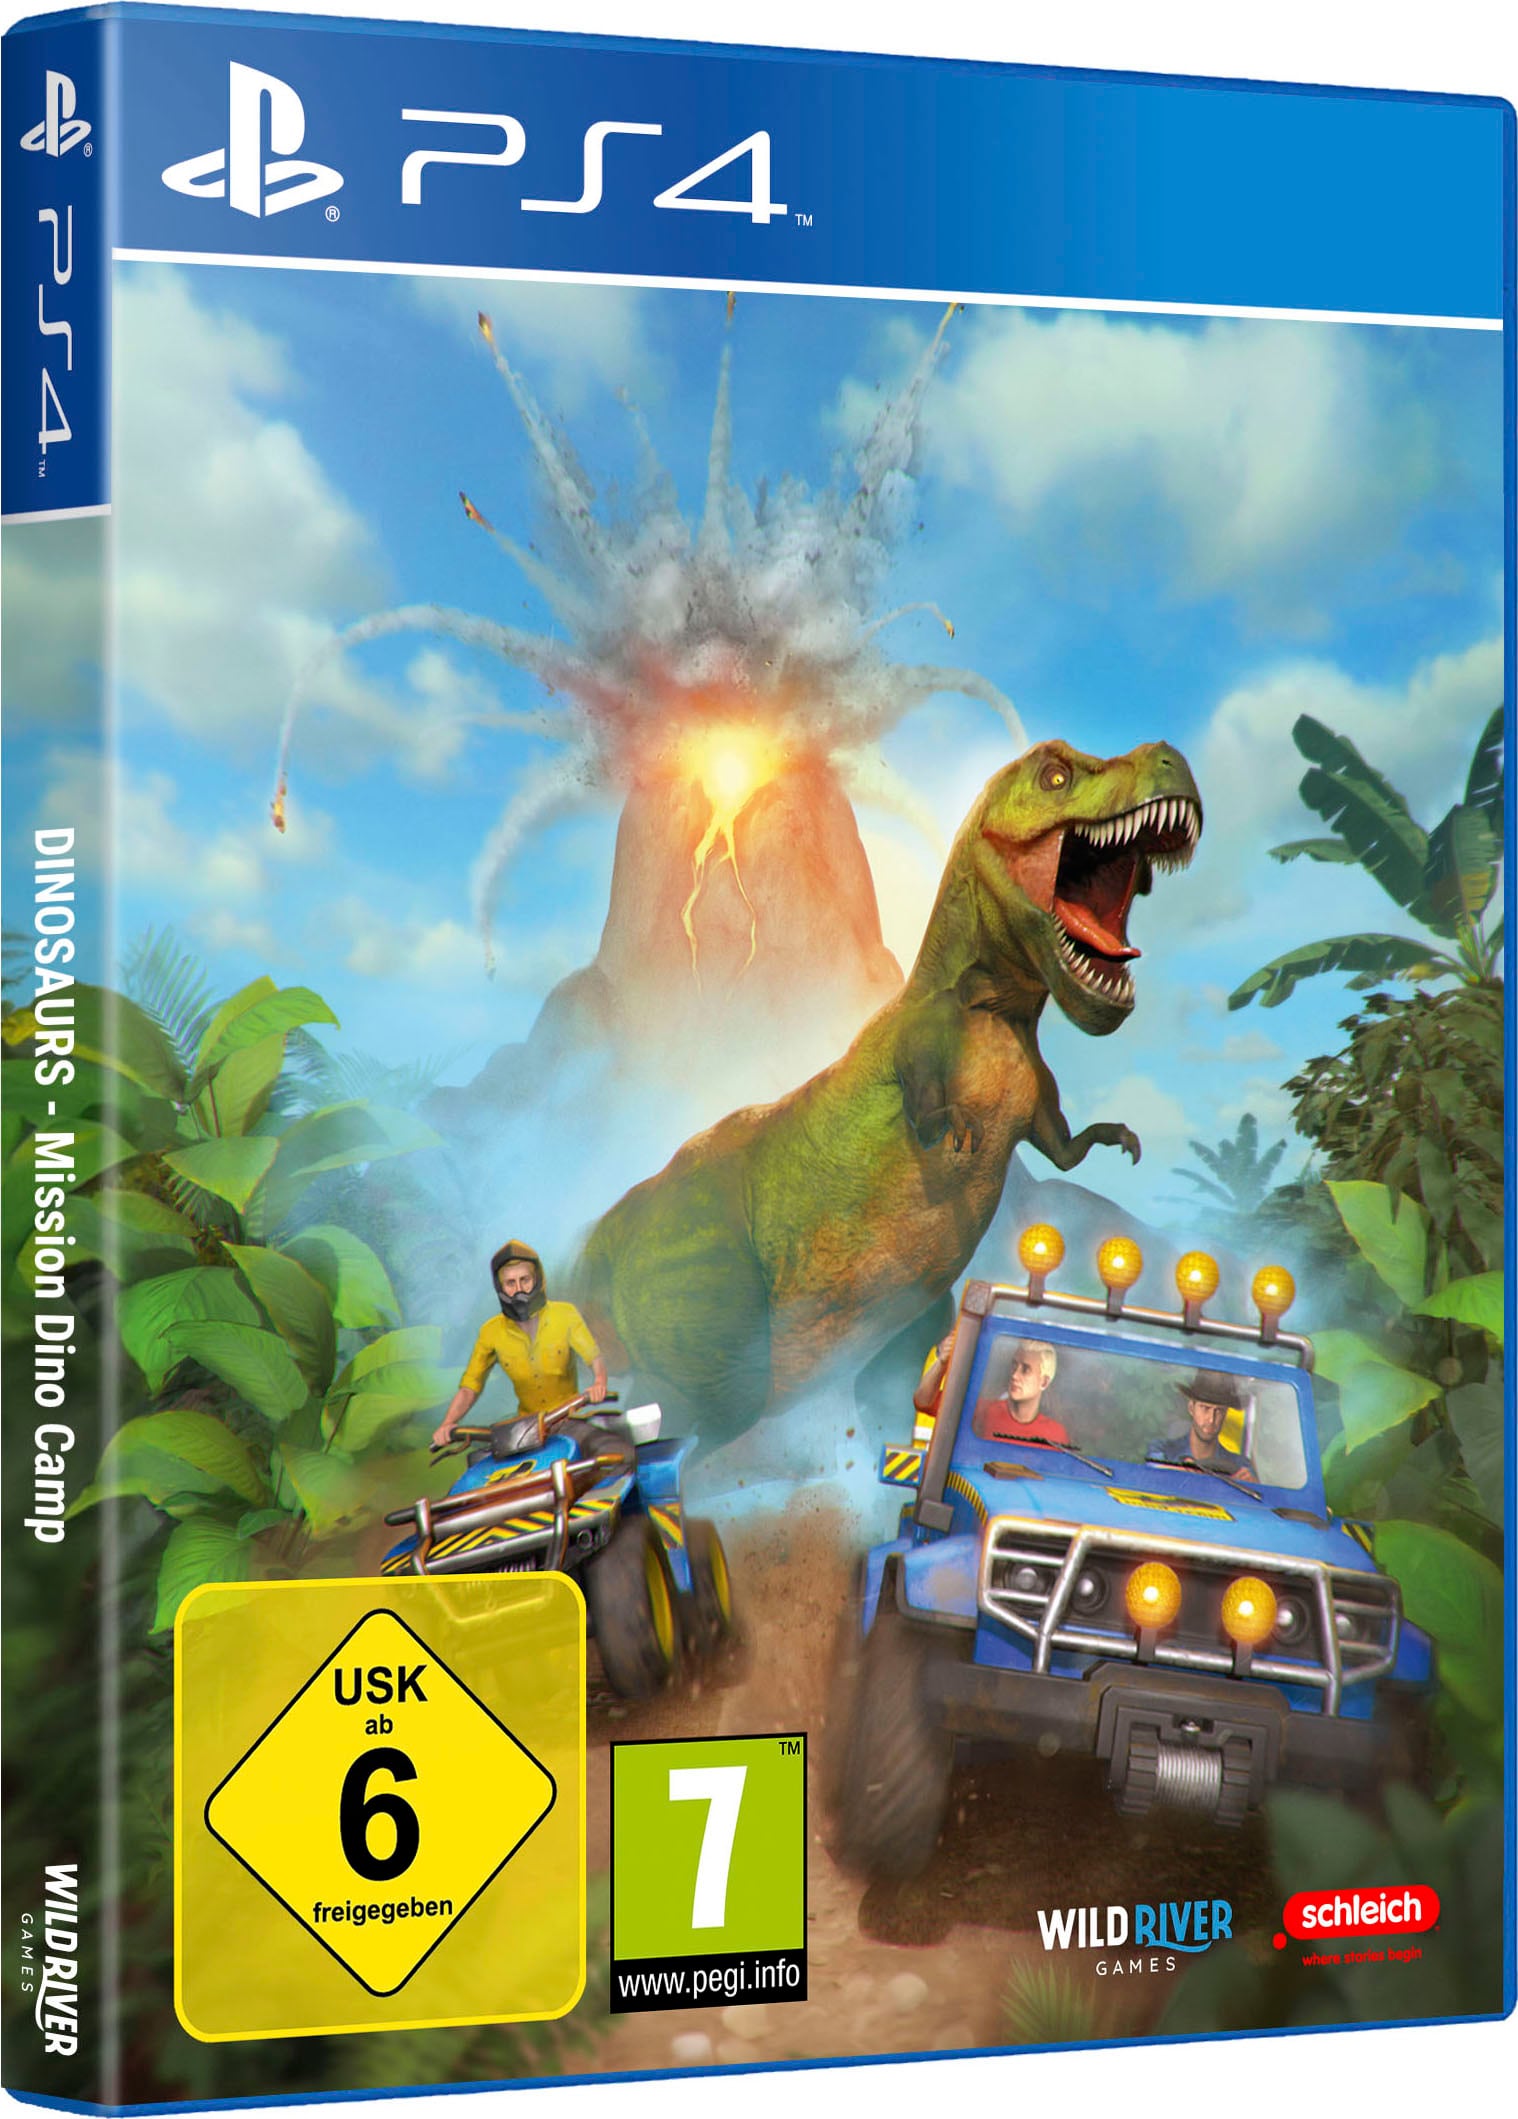 Software Pyramide Spielesoftware »Dinosaurs: Mission 4 Camp«, Dino bei PlayStation